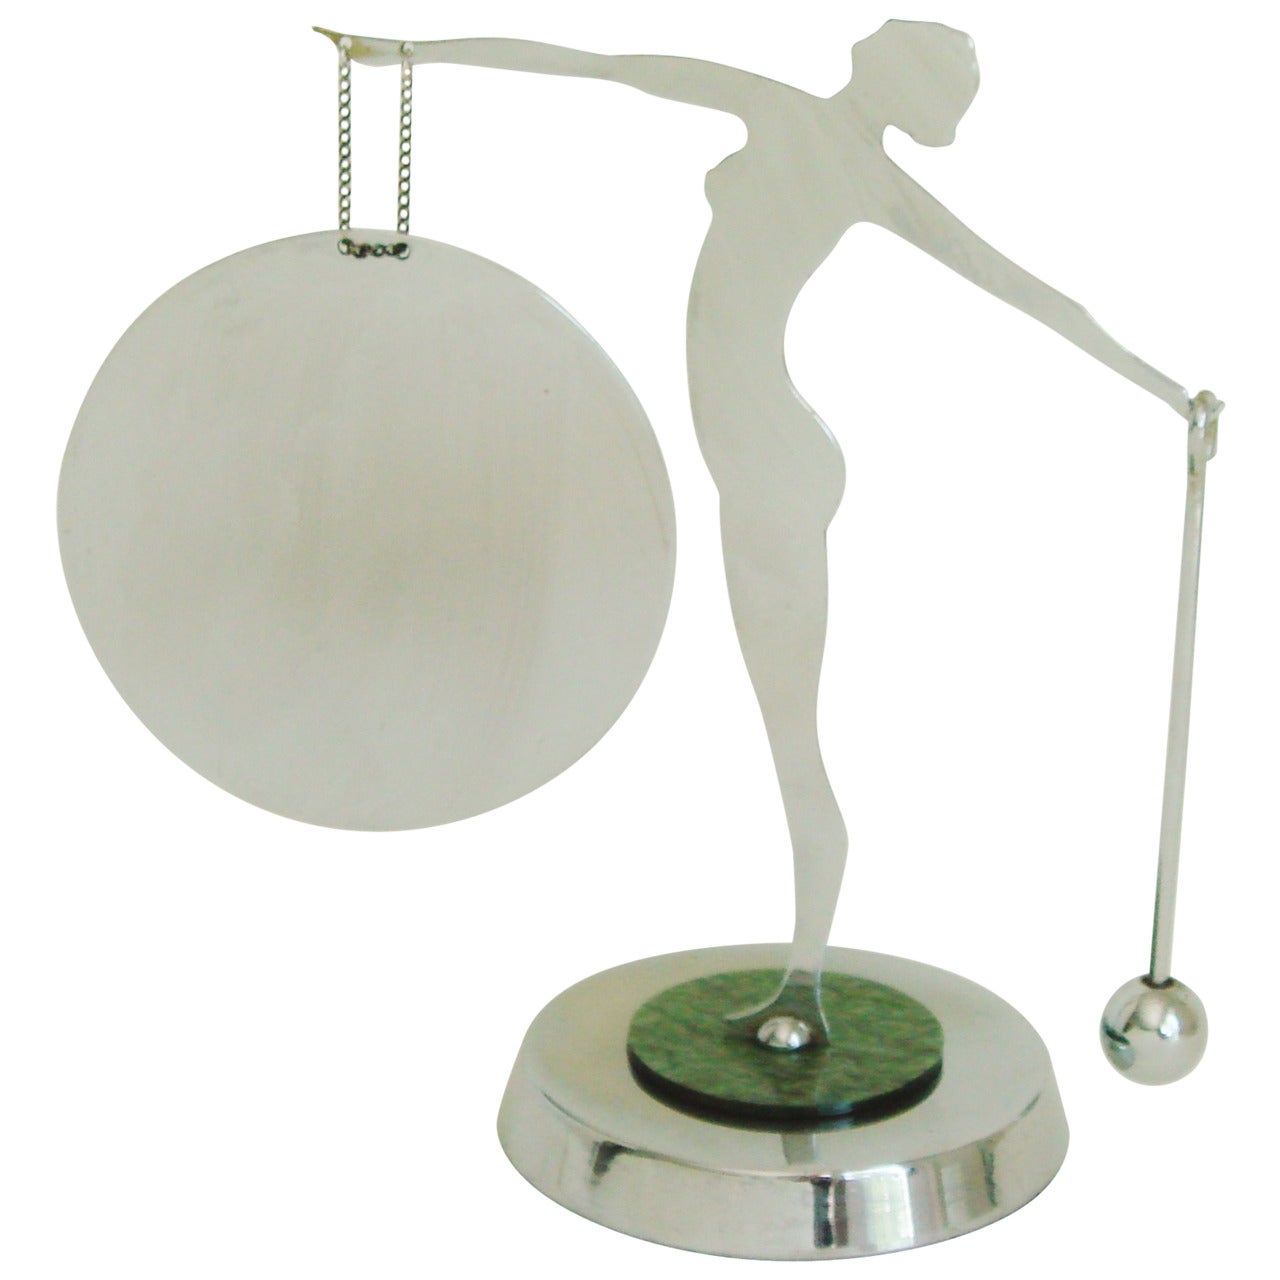 English Art Deco Chrome and Pearloid Figural Nude Dinner Gong with Striker